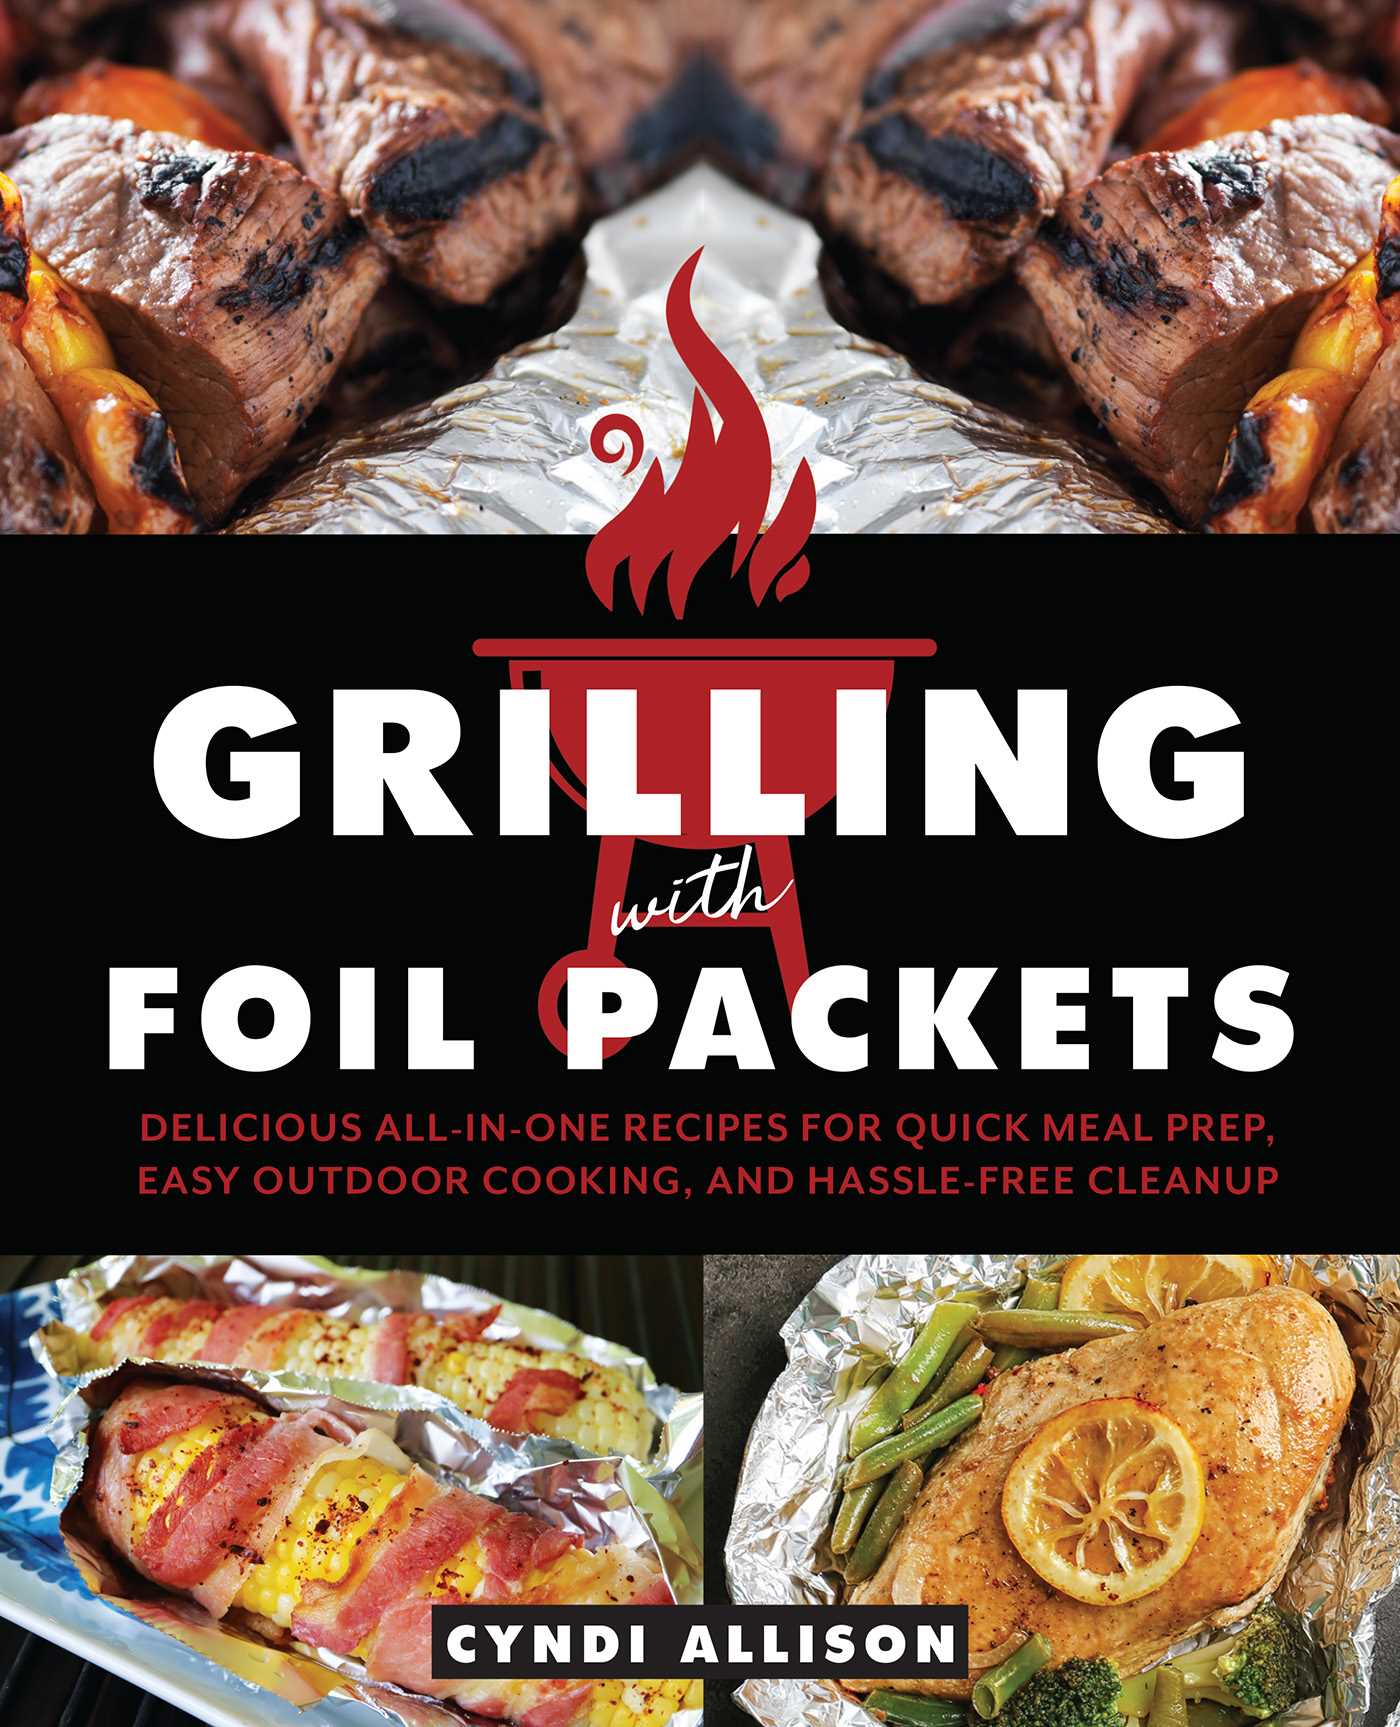 Grilling with Foil Packets